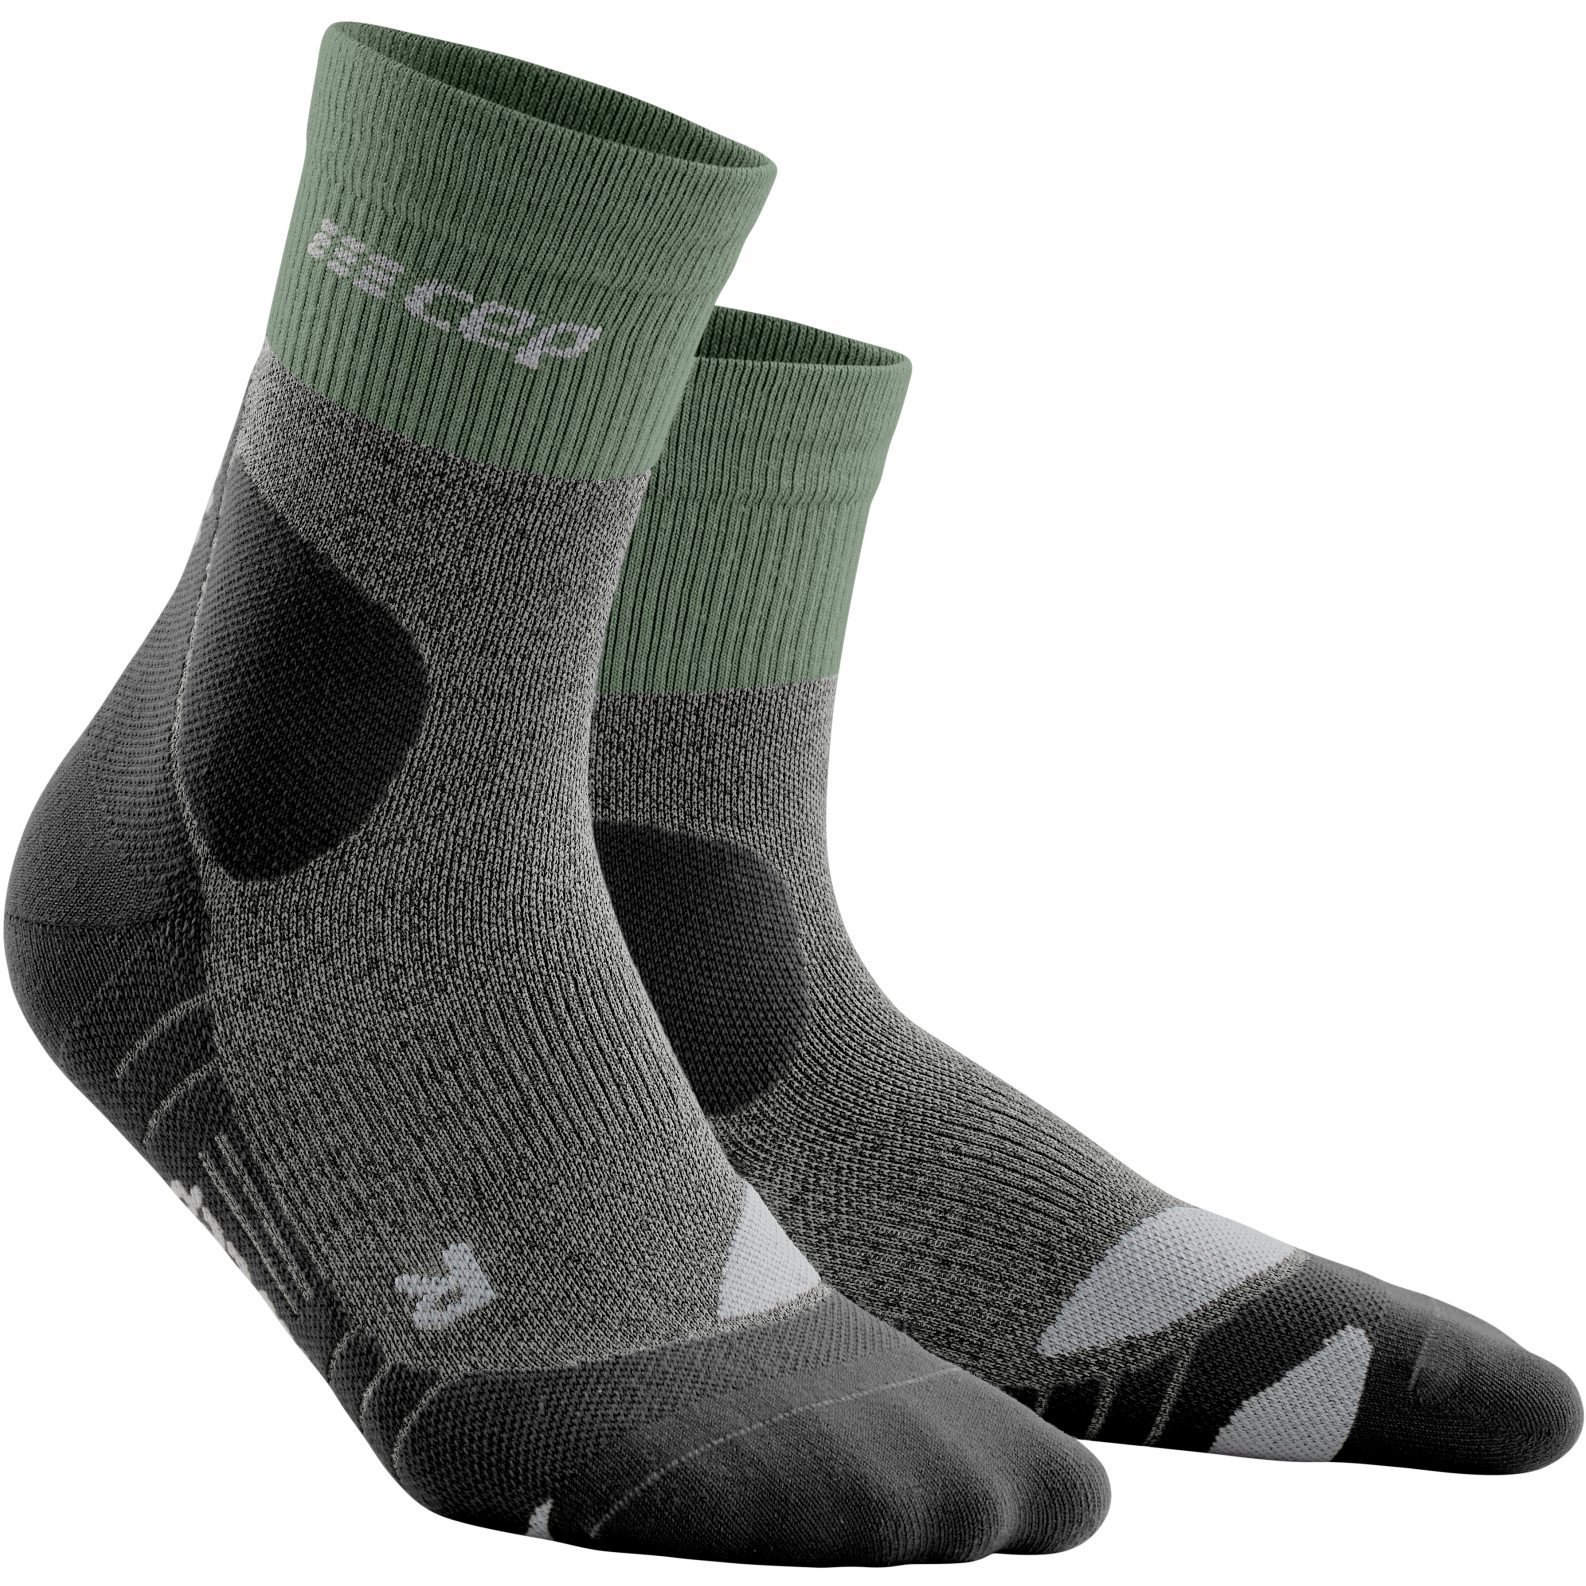 Picture of CEP Hiking Merino Mid Cut Compression Socks Women - green/light grey